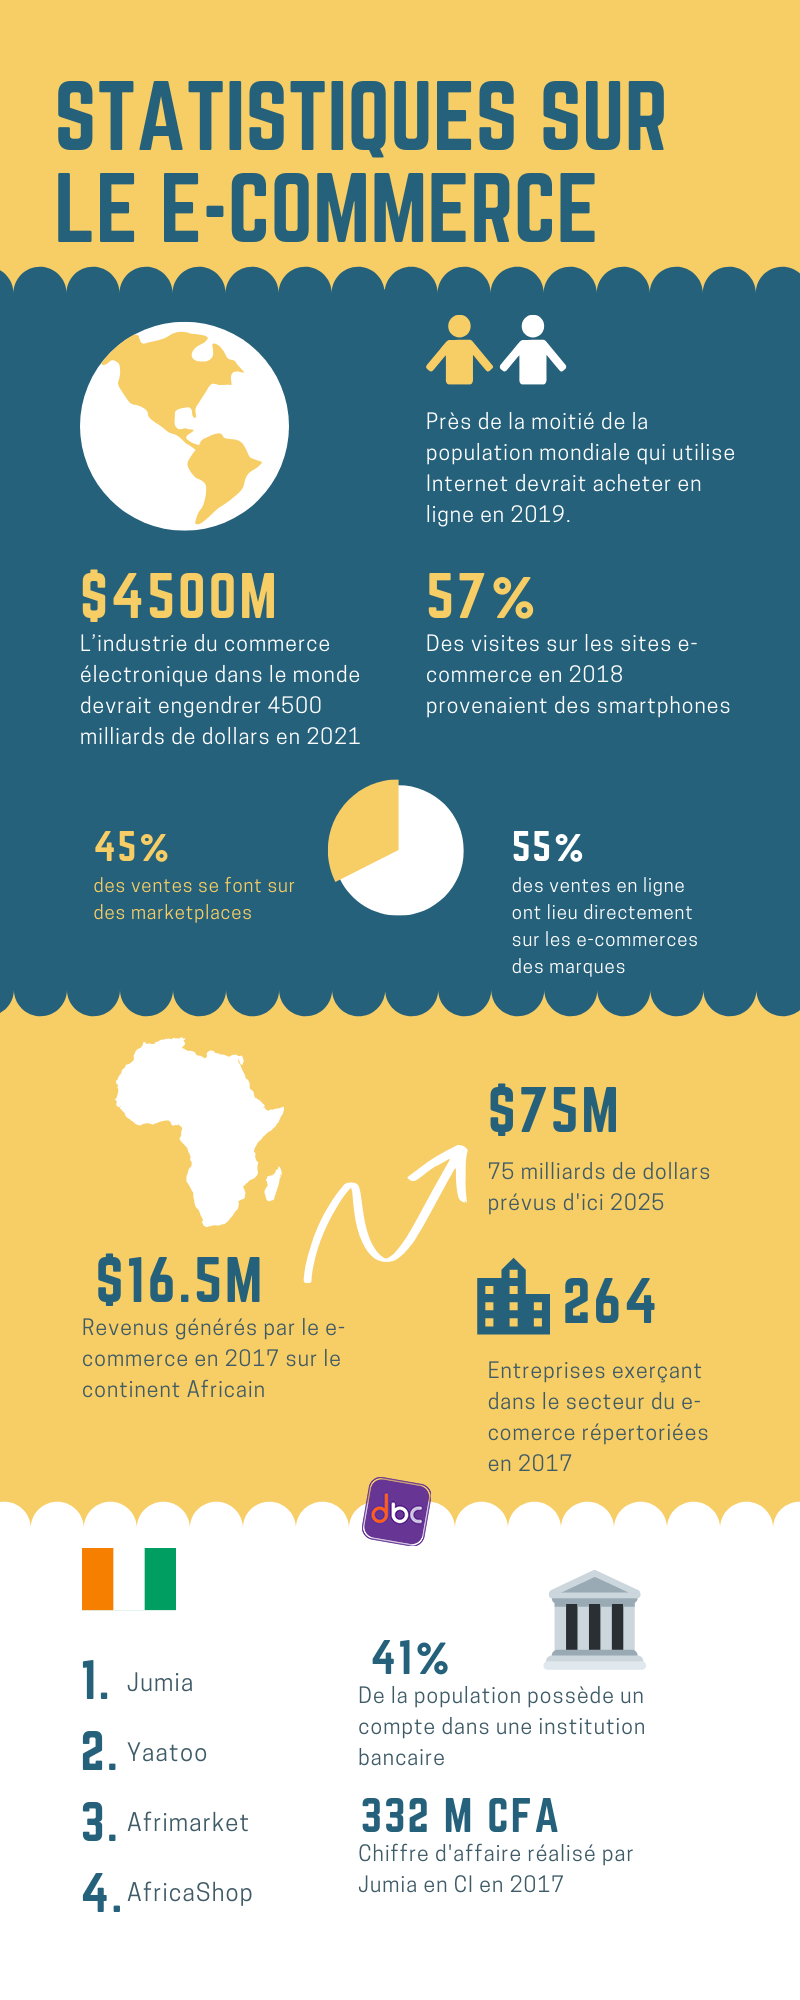 Infographie : statistiques e-commerce - DbC